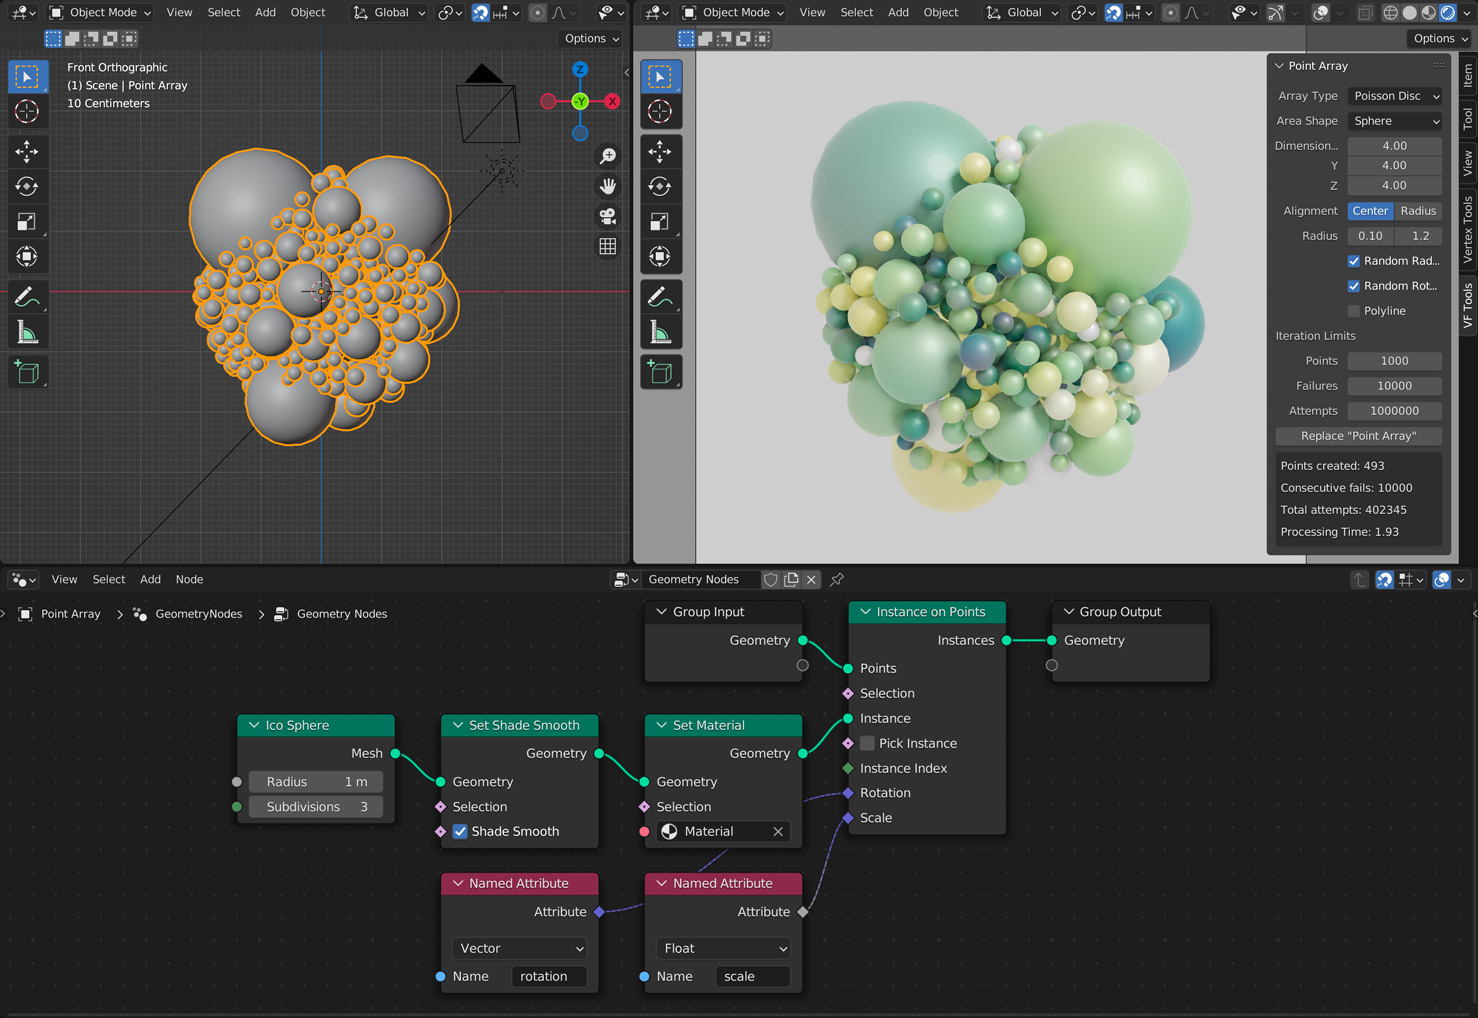 screenshot of the add-on interface in Blender showing the poisson disc options and sample geometry nodes setup